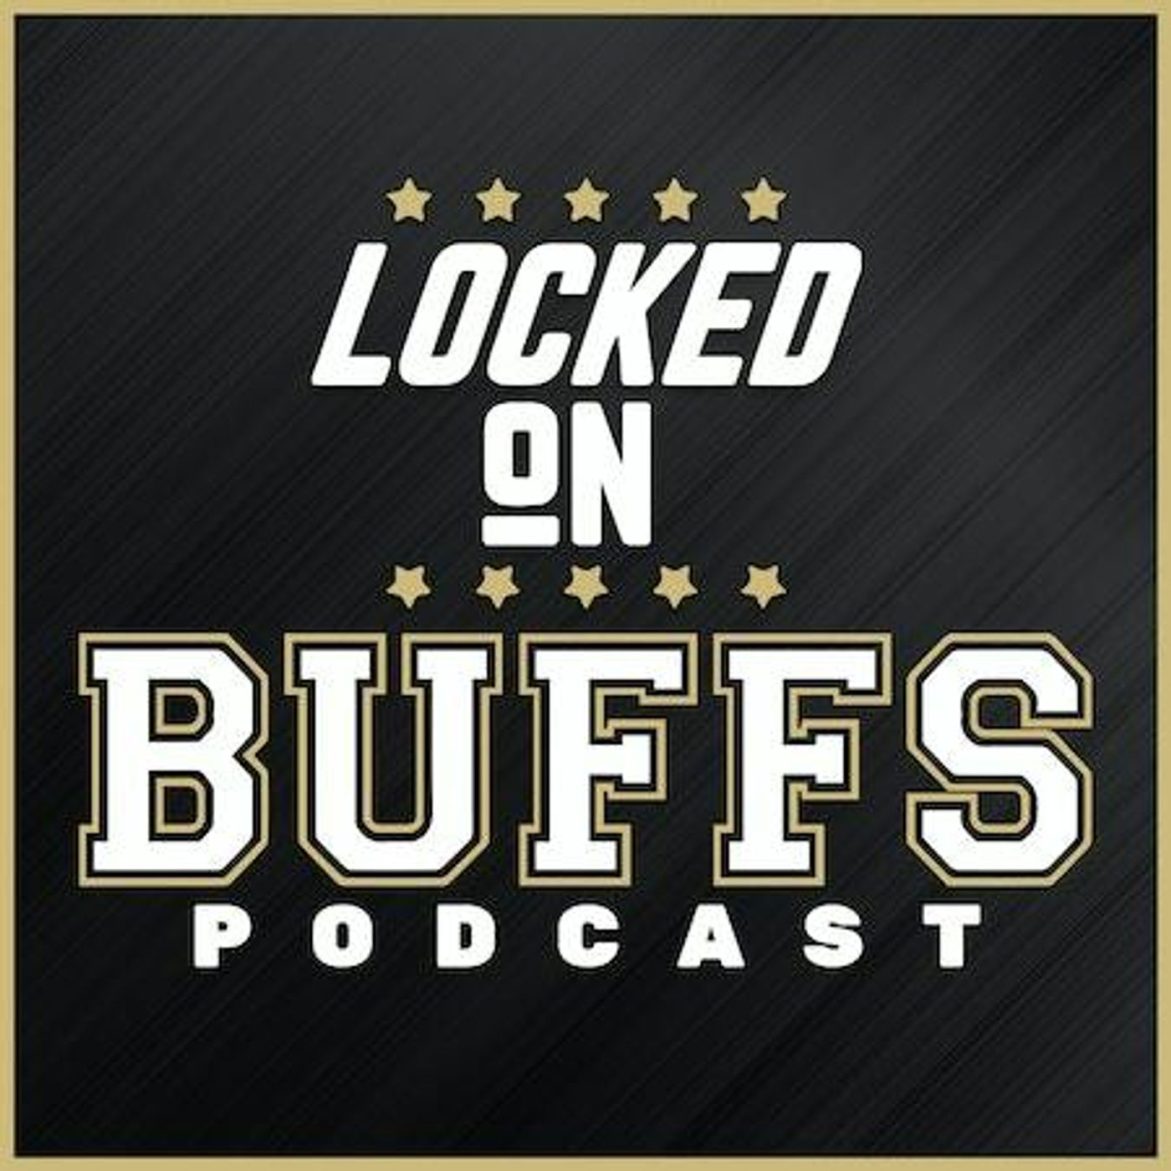 Black Podcasting - What Buffs fans should expect from Deion Sanders in 2023